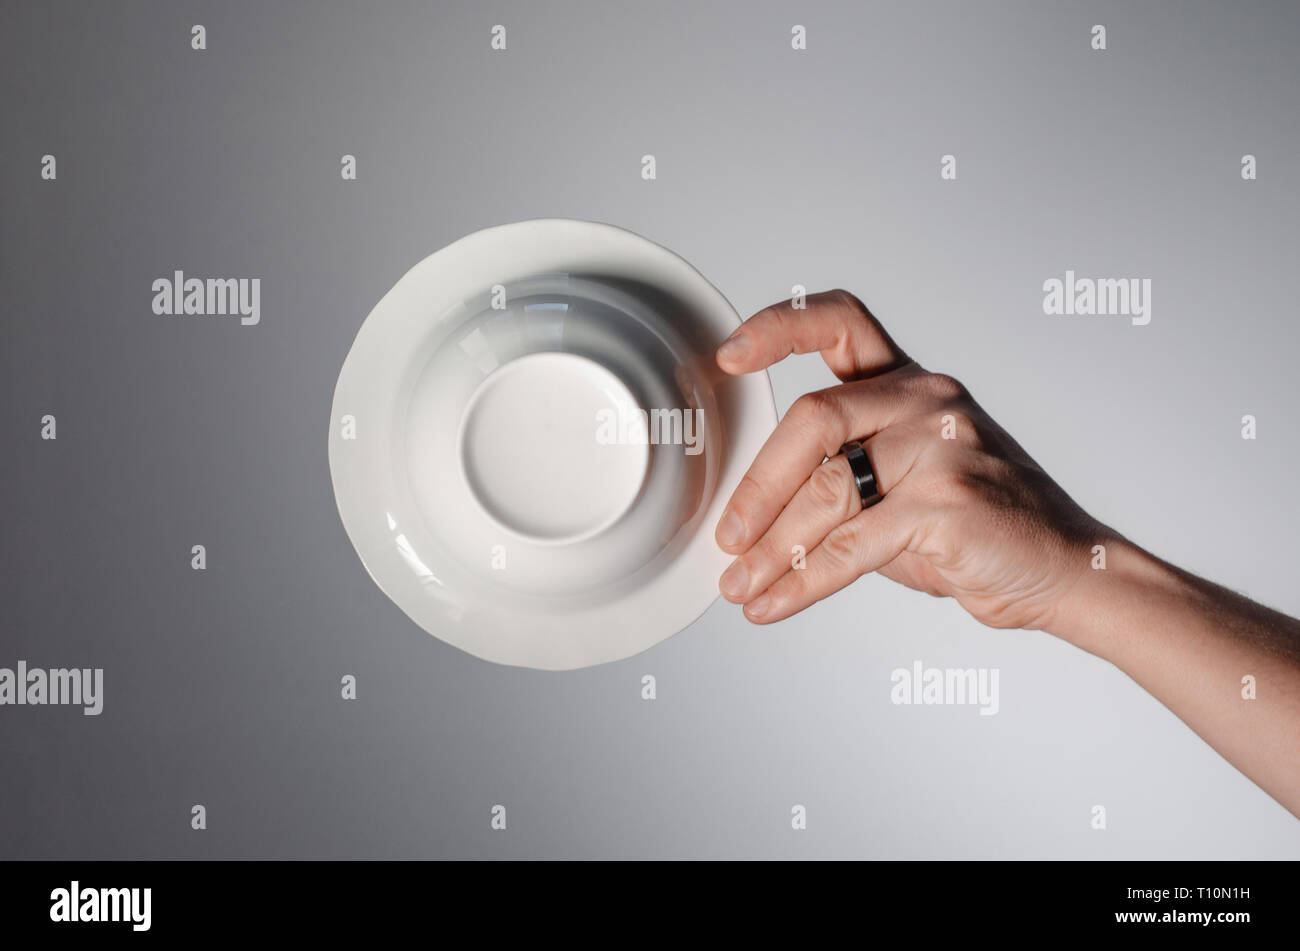 Male hand holding a white plate, on a light background. bottom view Stock Photo